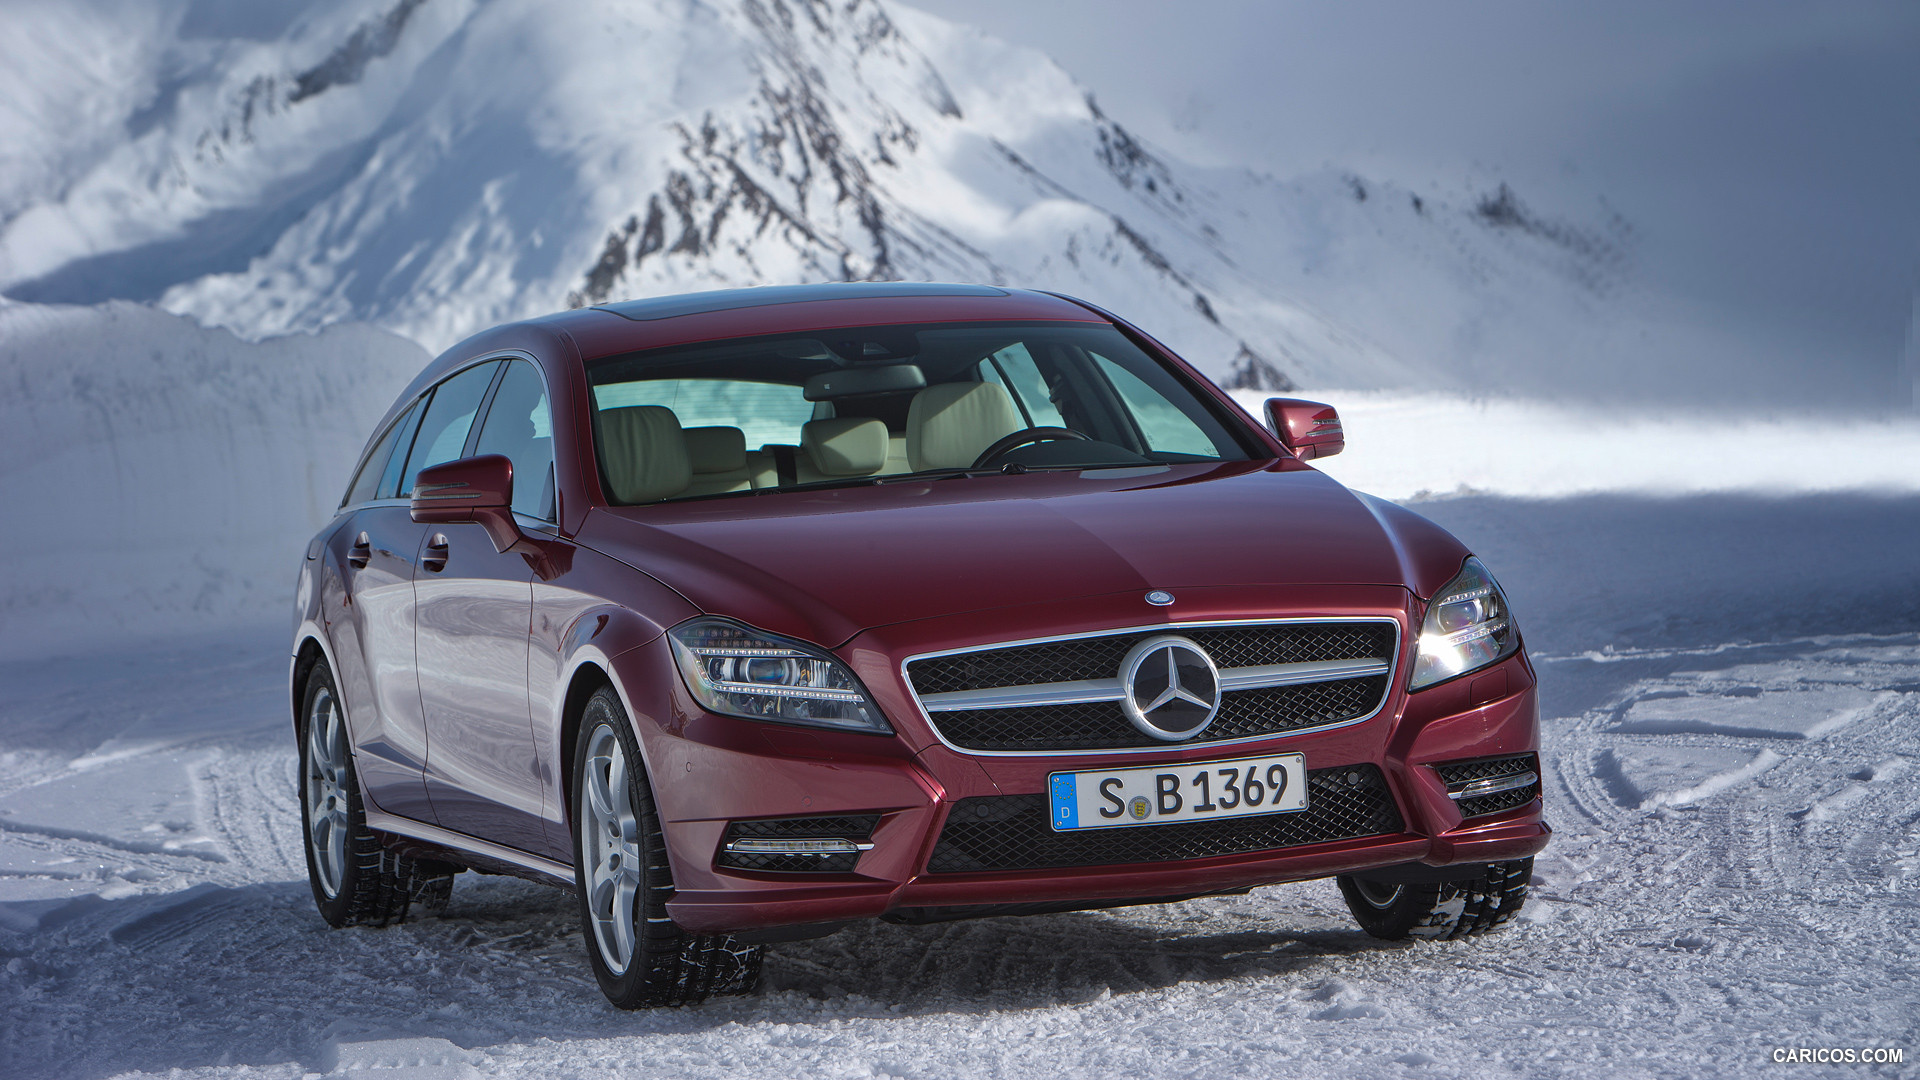 2013 Mercedes-Benz CLS 500 4MATIC Shooting Brake on Snow - Front, #155 of 184